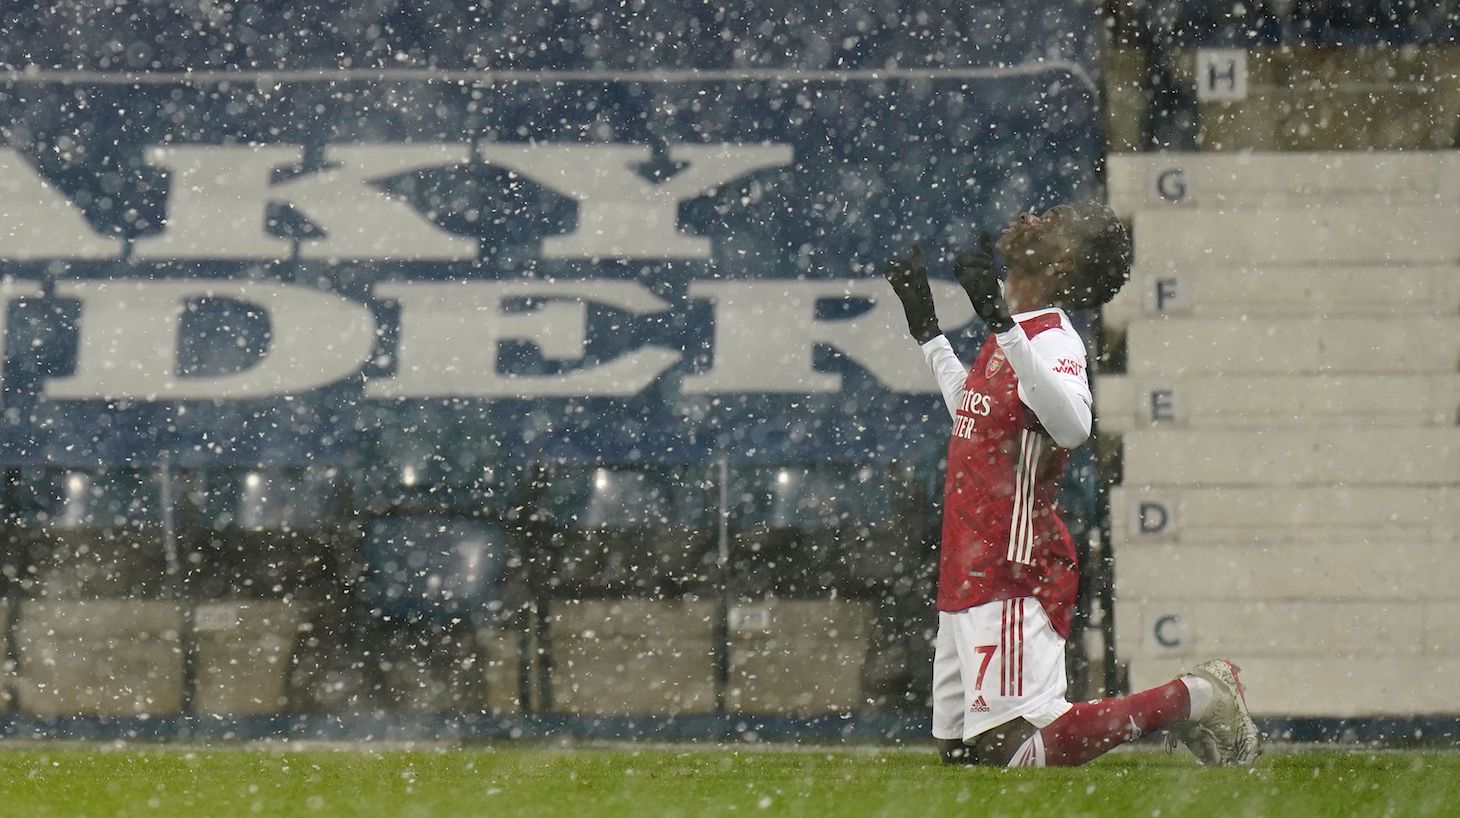 Arsenal's English striker Bukayo Saka celebrates scoring their second goal during the English Premier League football match between West Bromwich Albion and Arsenal at The Hawthorns stadium in West Bromwich, central England, on January 2, 2021.